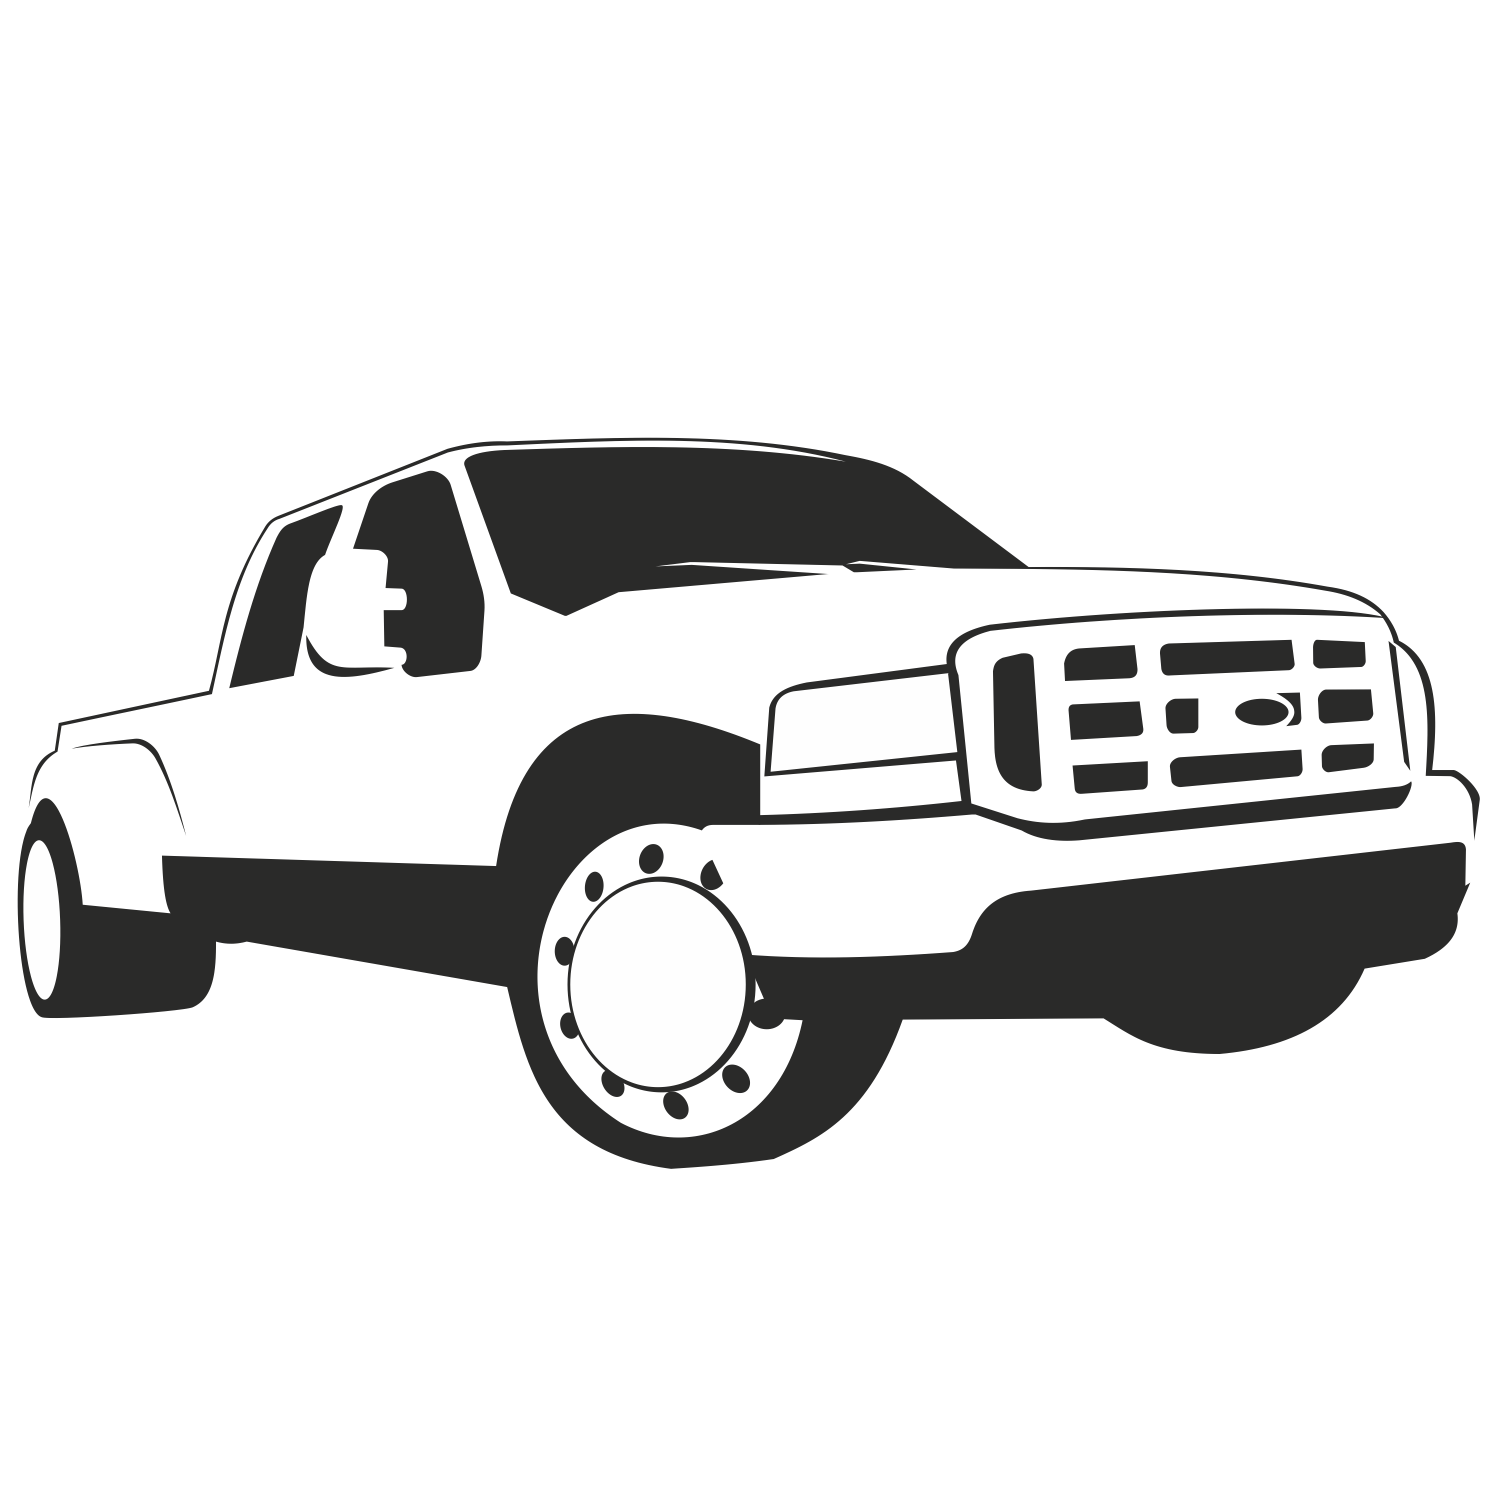 free vector clipart truck - photo #24